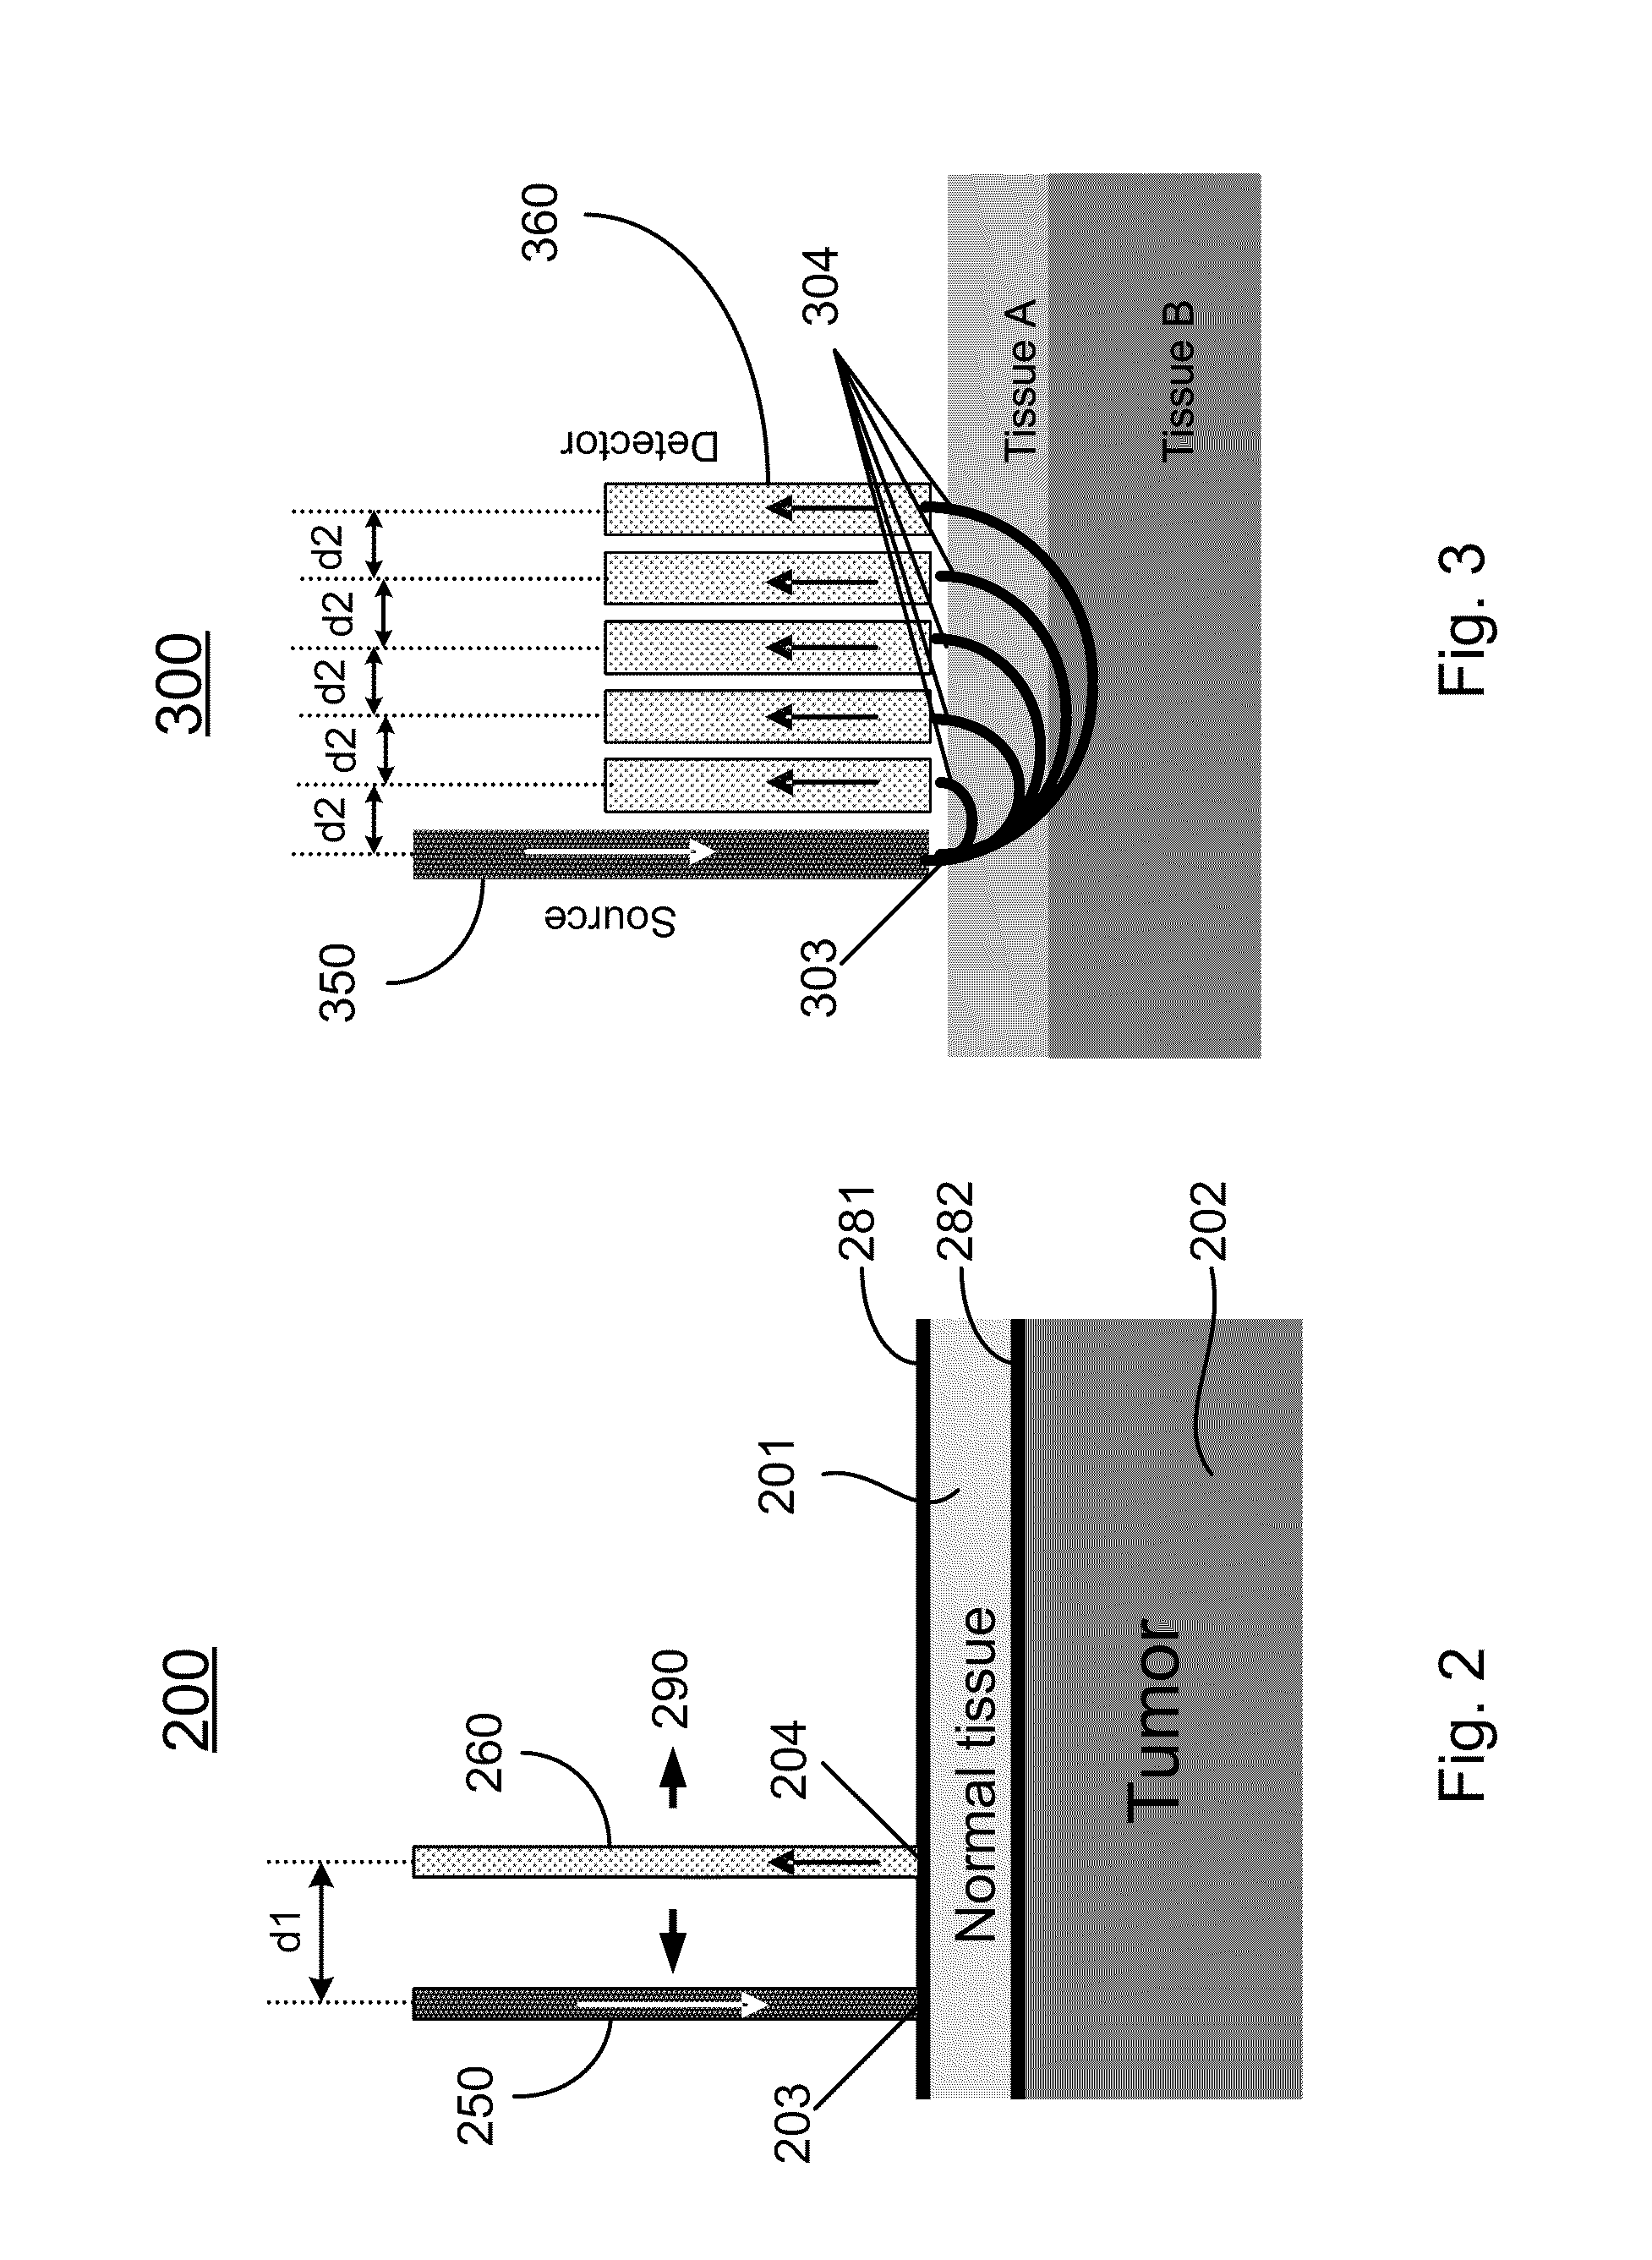 Spatially offset raman spectroscopy of layered soft tissues and applications of same